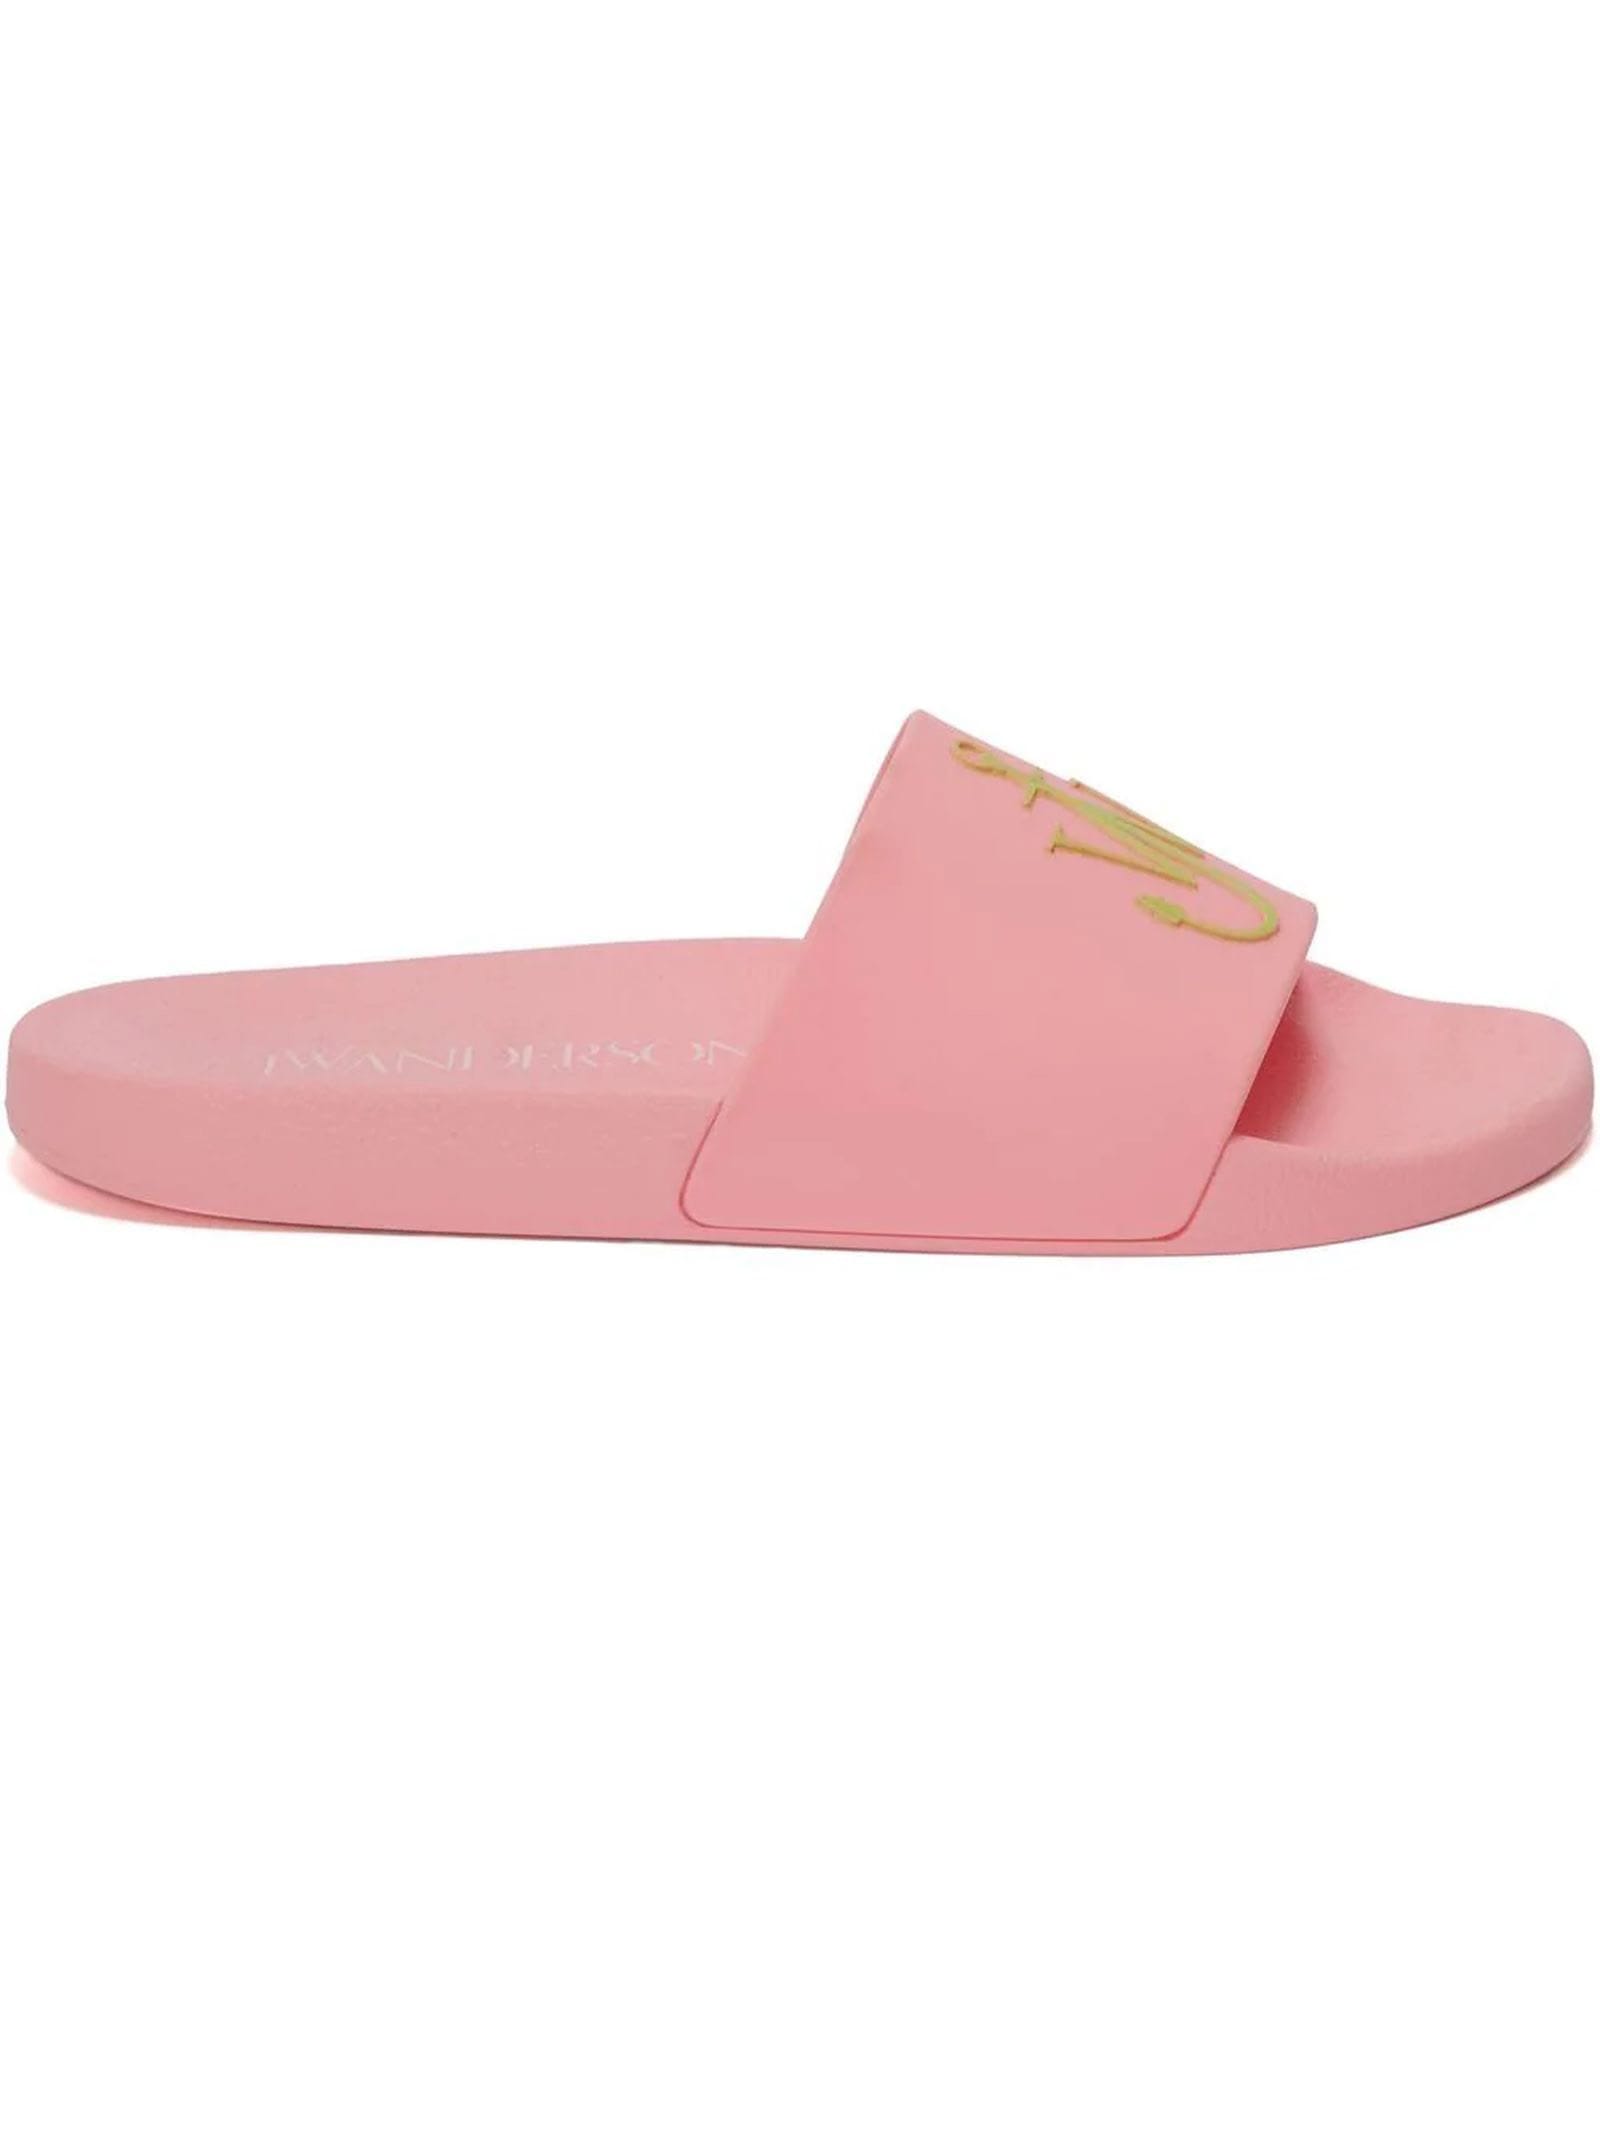 J.W. Anderson Pink Leather Sandals